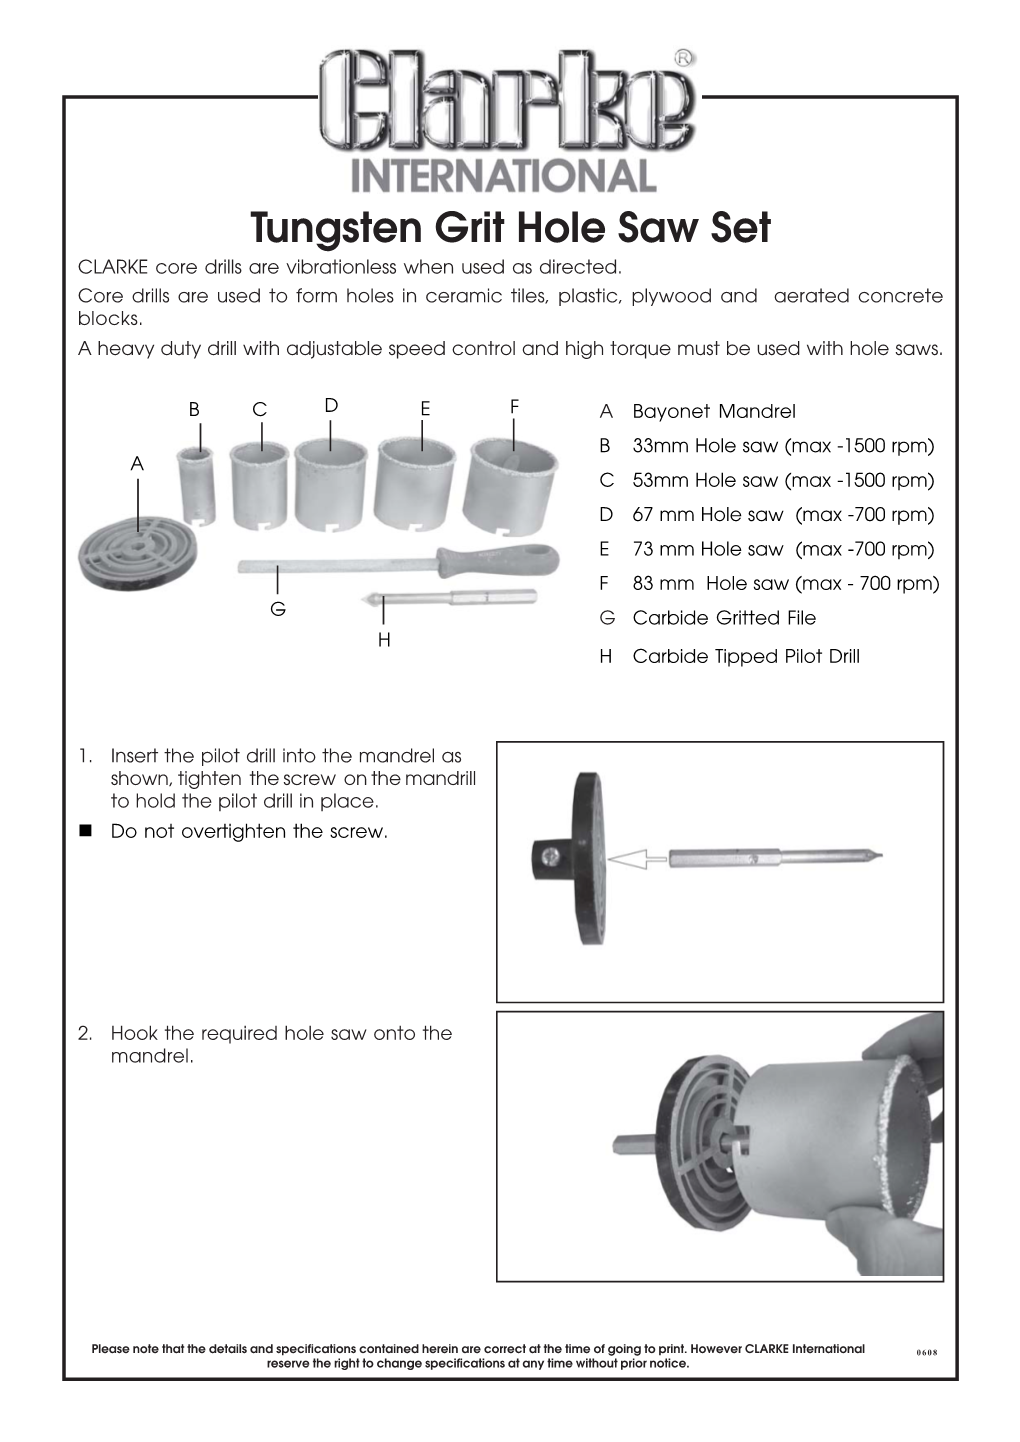 Tungsten Grit Hole Saw Set CLARKE Core Drills Are Vibrationless When Used As Directed